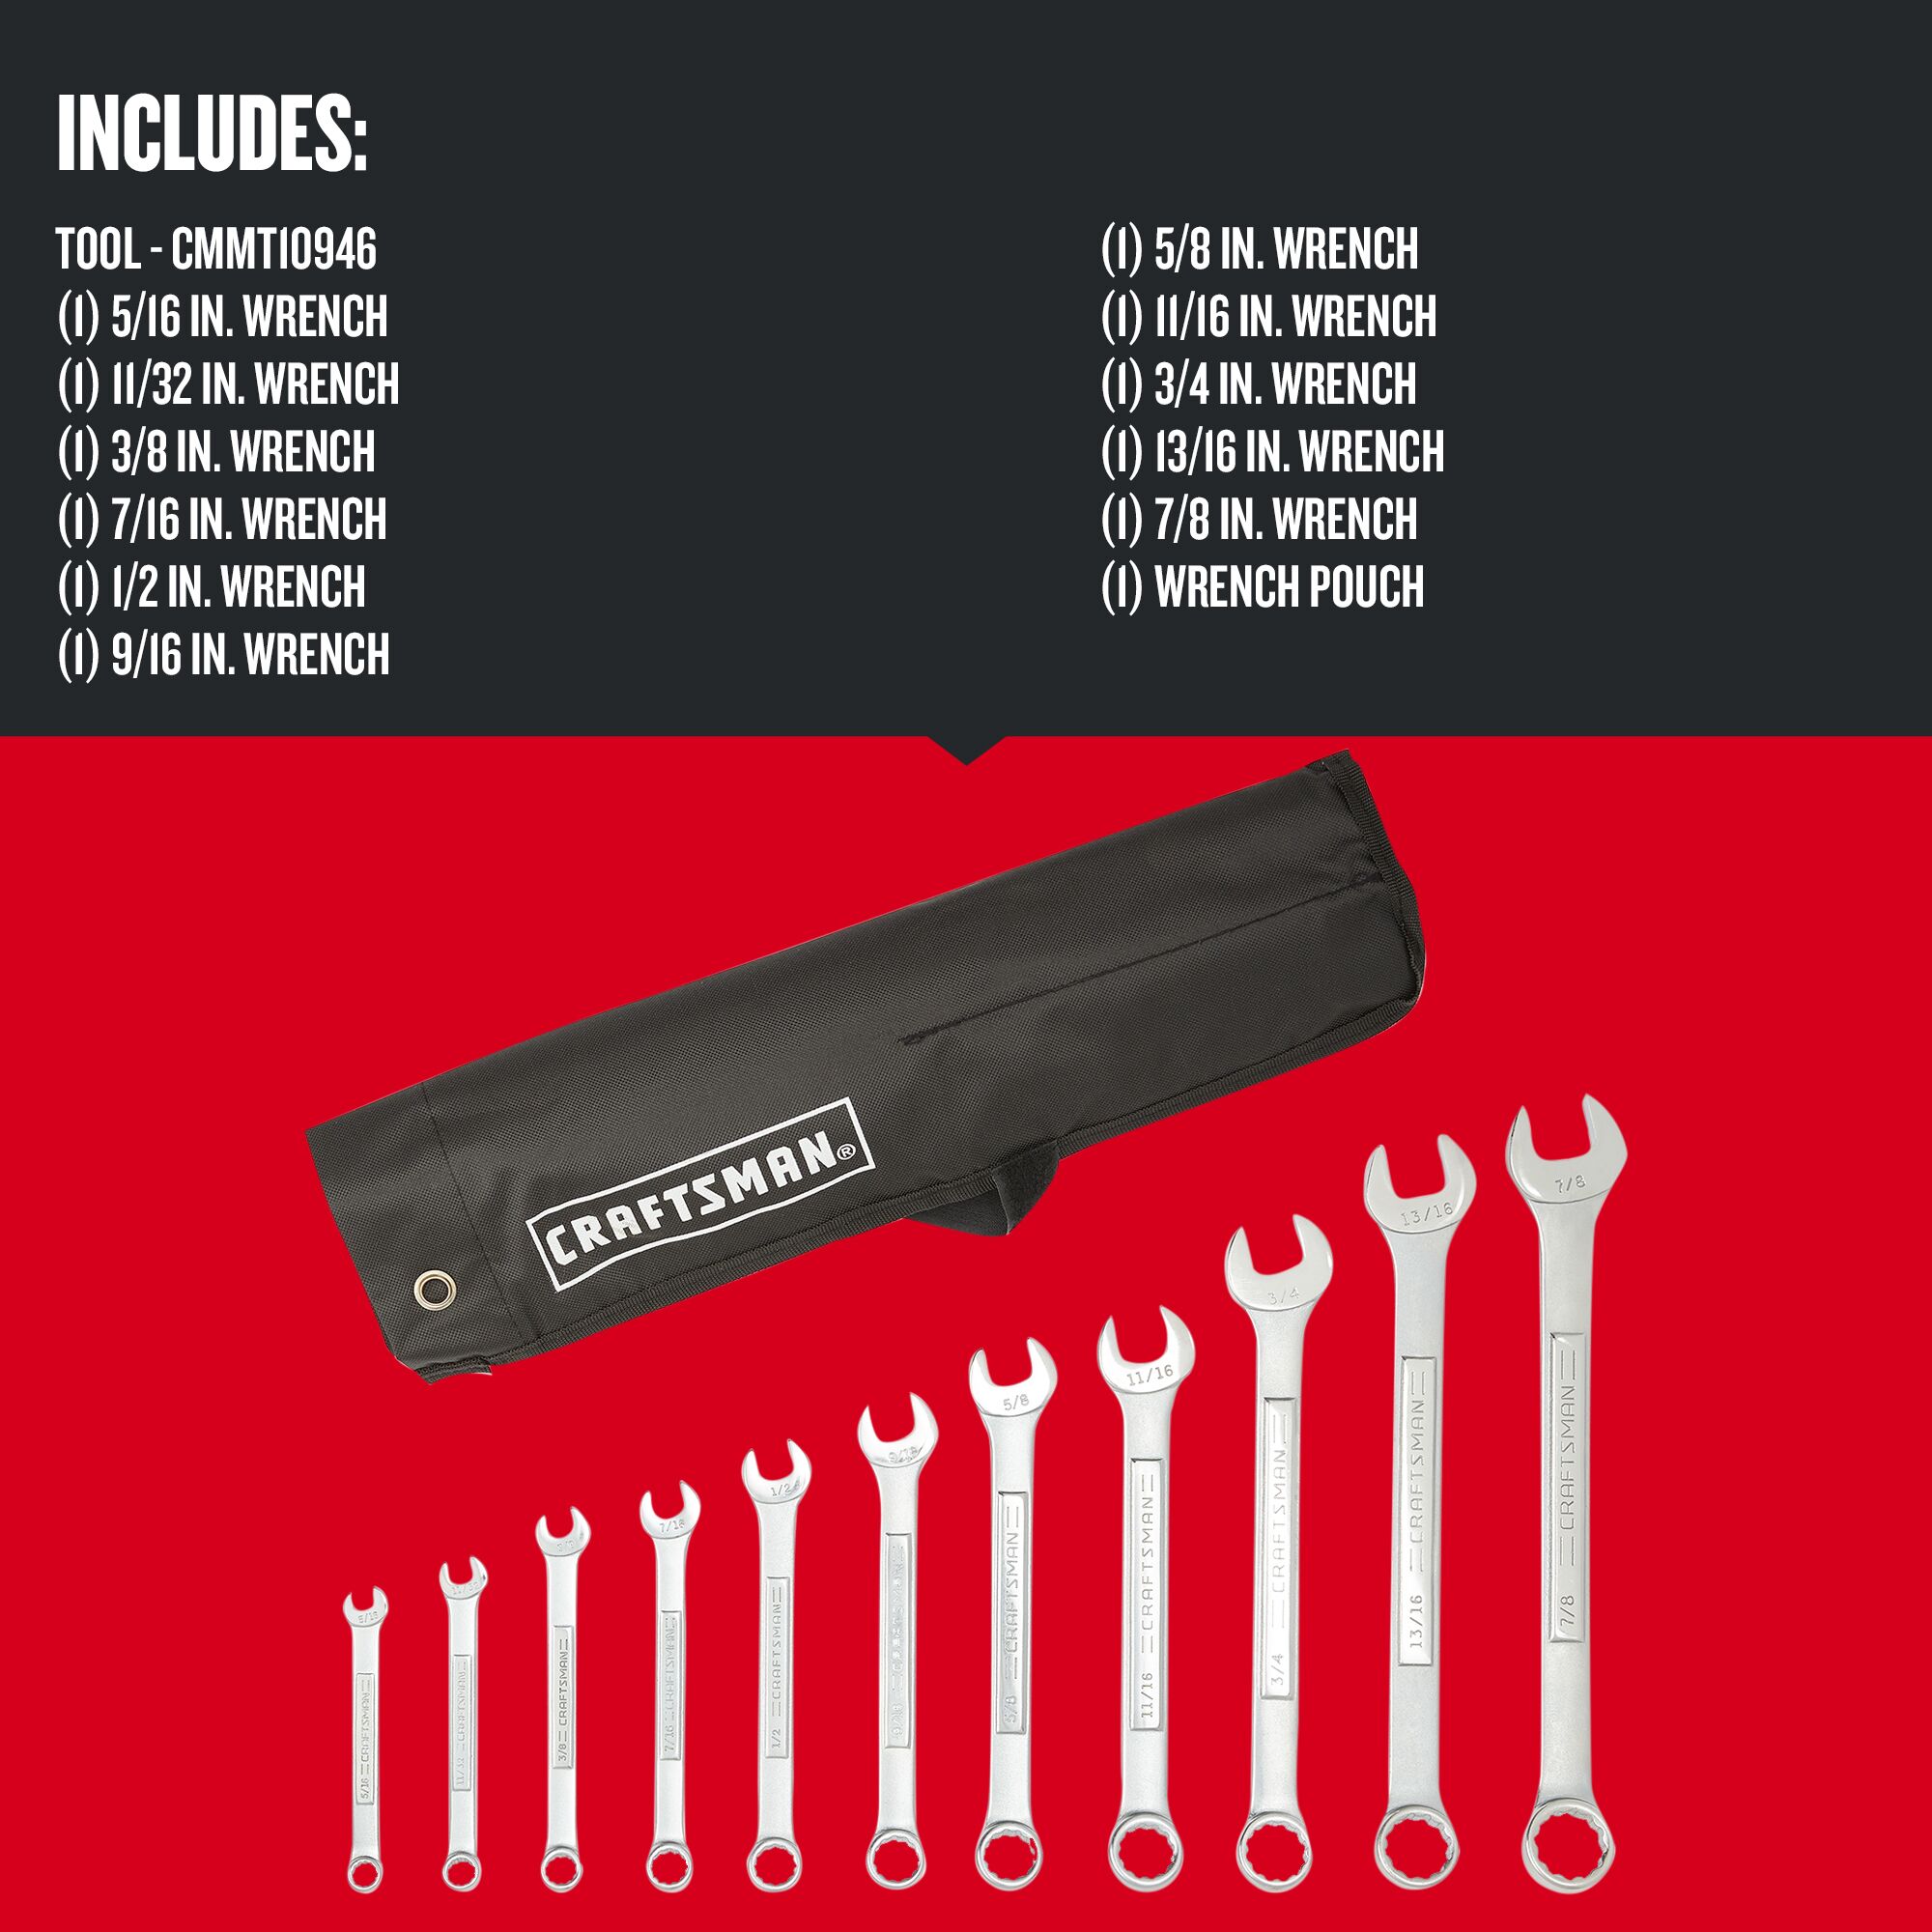 Front view of Craftsman 12 pt. Standard SAE Combination Wrench Set Tool Roll 11 pc. showing  (1) 5/16 in. wrench
one 11/32 in. wrench, one 3/8 in. wrench, one 7/16 in. wrench, one 1/2 in. wrench, one 9/16 in. wrench, one 5/8 in. wrench, one 11/16 in. wrench, one 3/4 in. wrench, one 13/16 in. wrench, one 7/8 in. wrench, and one wrench pouch